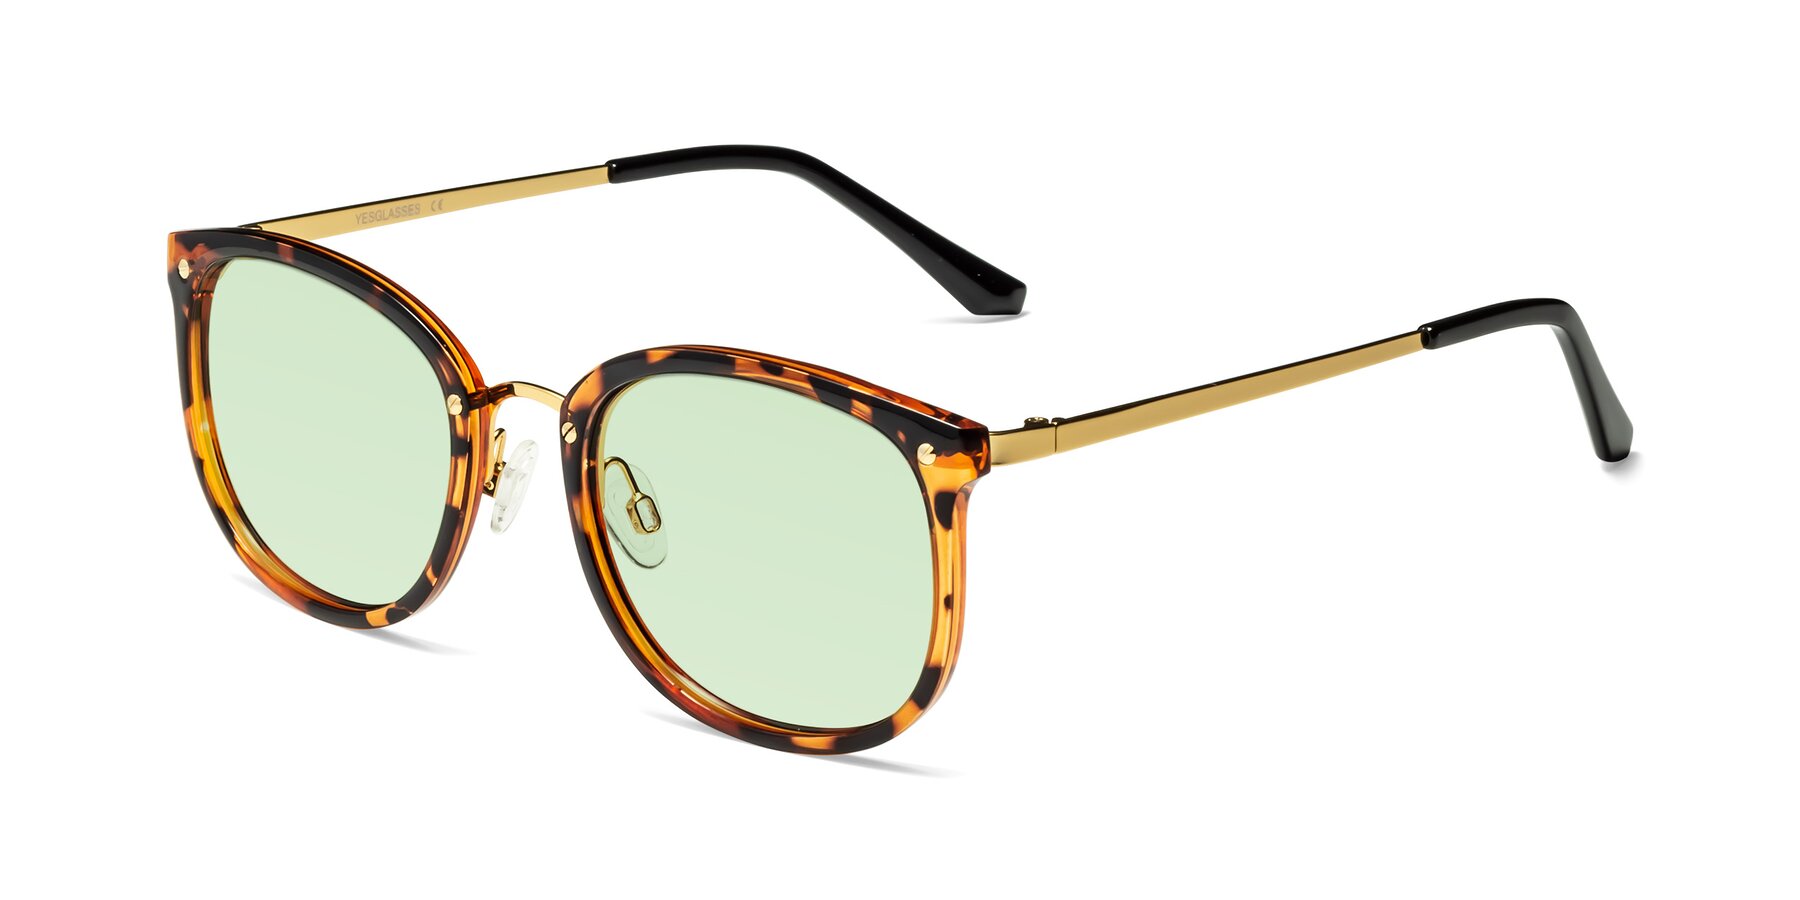 Angle of Timeless in Tortoise-Golden with Light Green Tinted Lenses